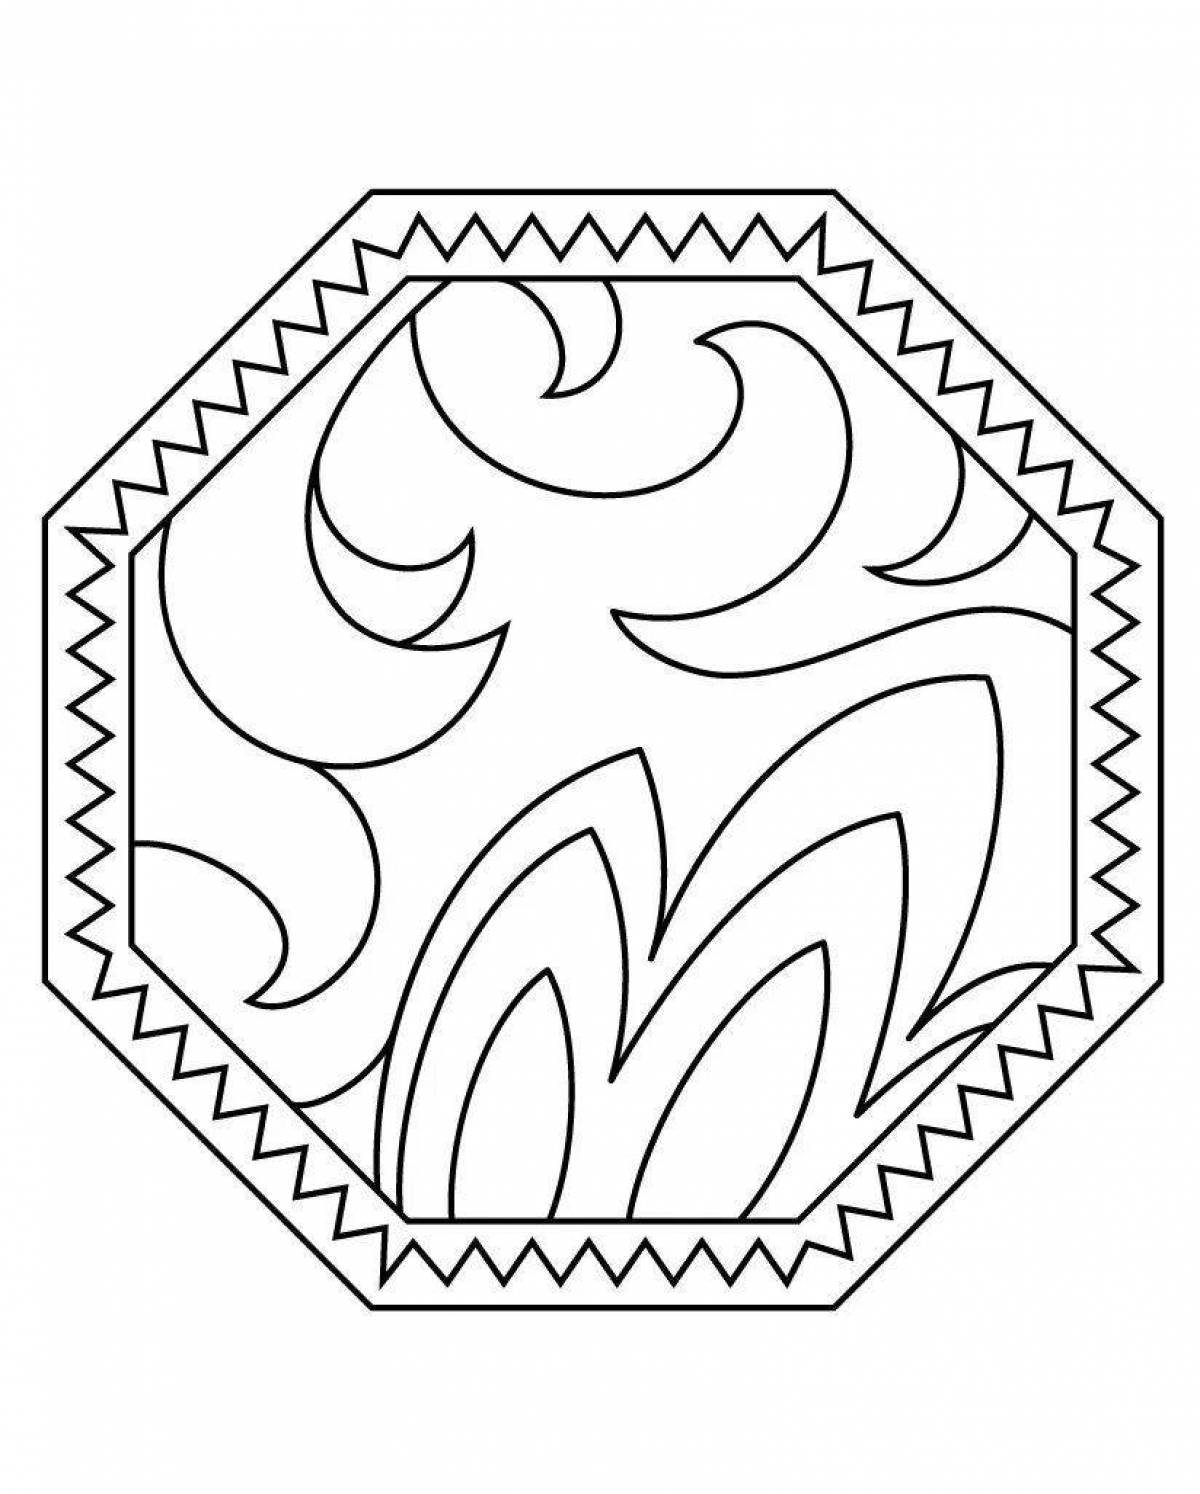 Detailed coloring of the Tatar ornament